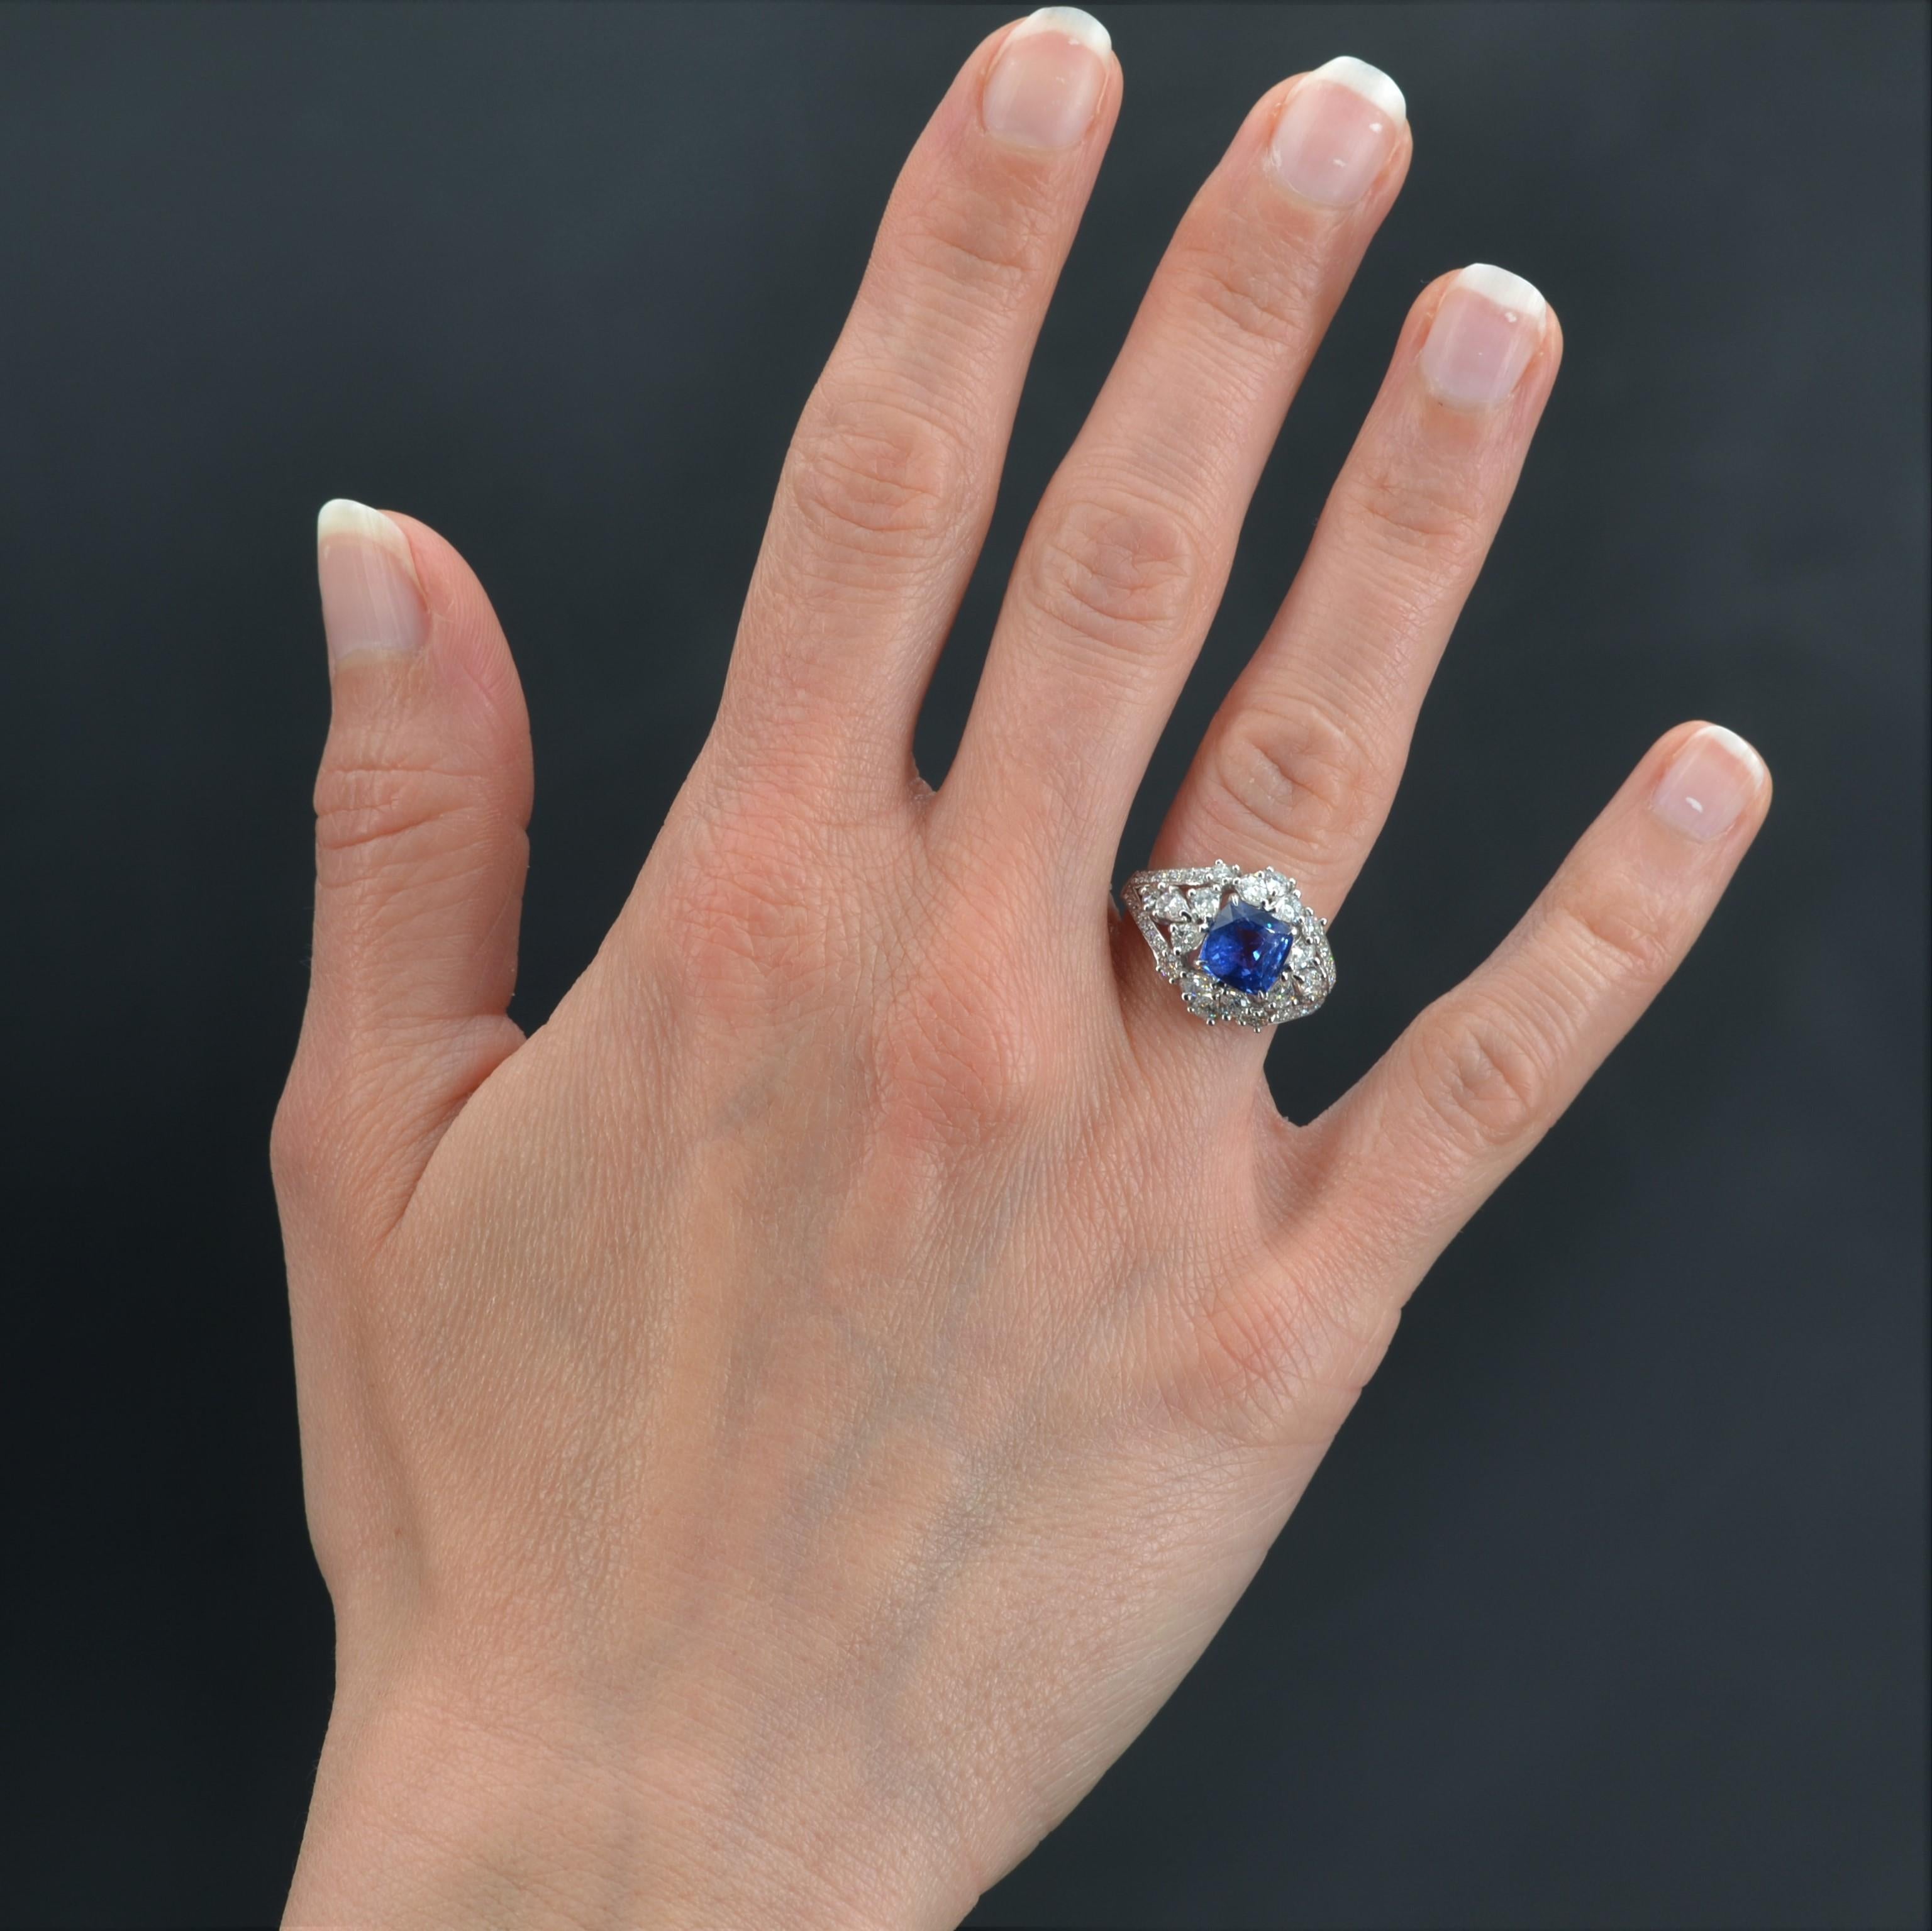 Ring in 18 karat white gold, eagle head hallmark.
Delightful dome ring, it is adorned in the center of a square cushion- cut sapphire. The half of the setting is openwork and decorated with modern brilliant-cut diamonds, pear-cut diamonds of